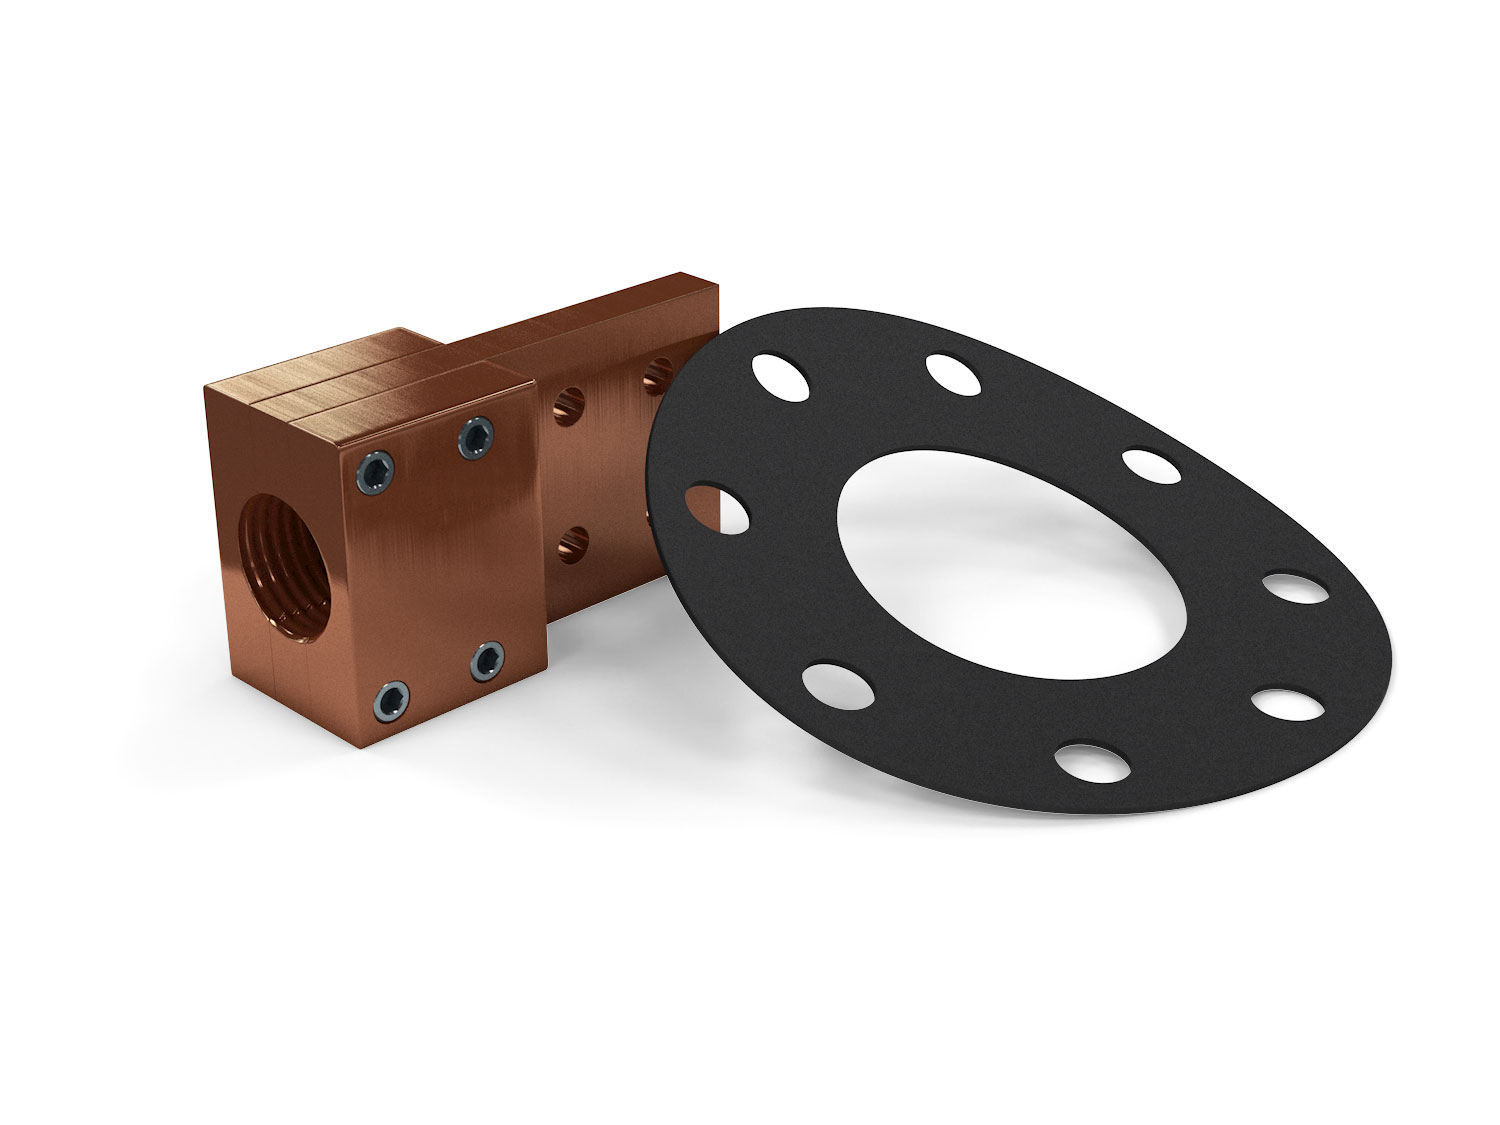  Accessories: Gaskets and NEMA Pad Connectors